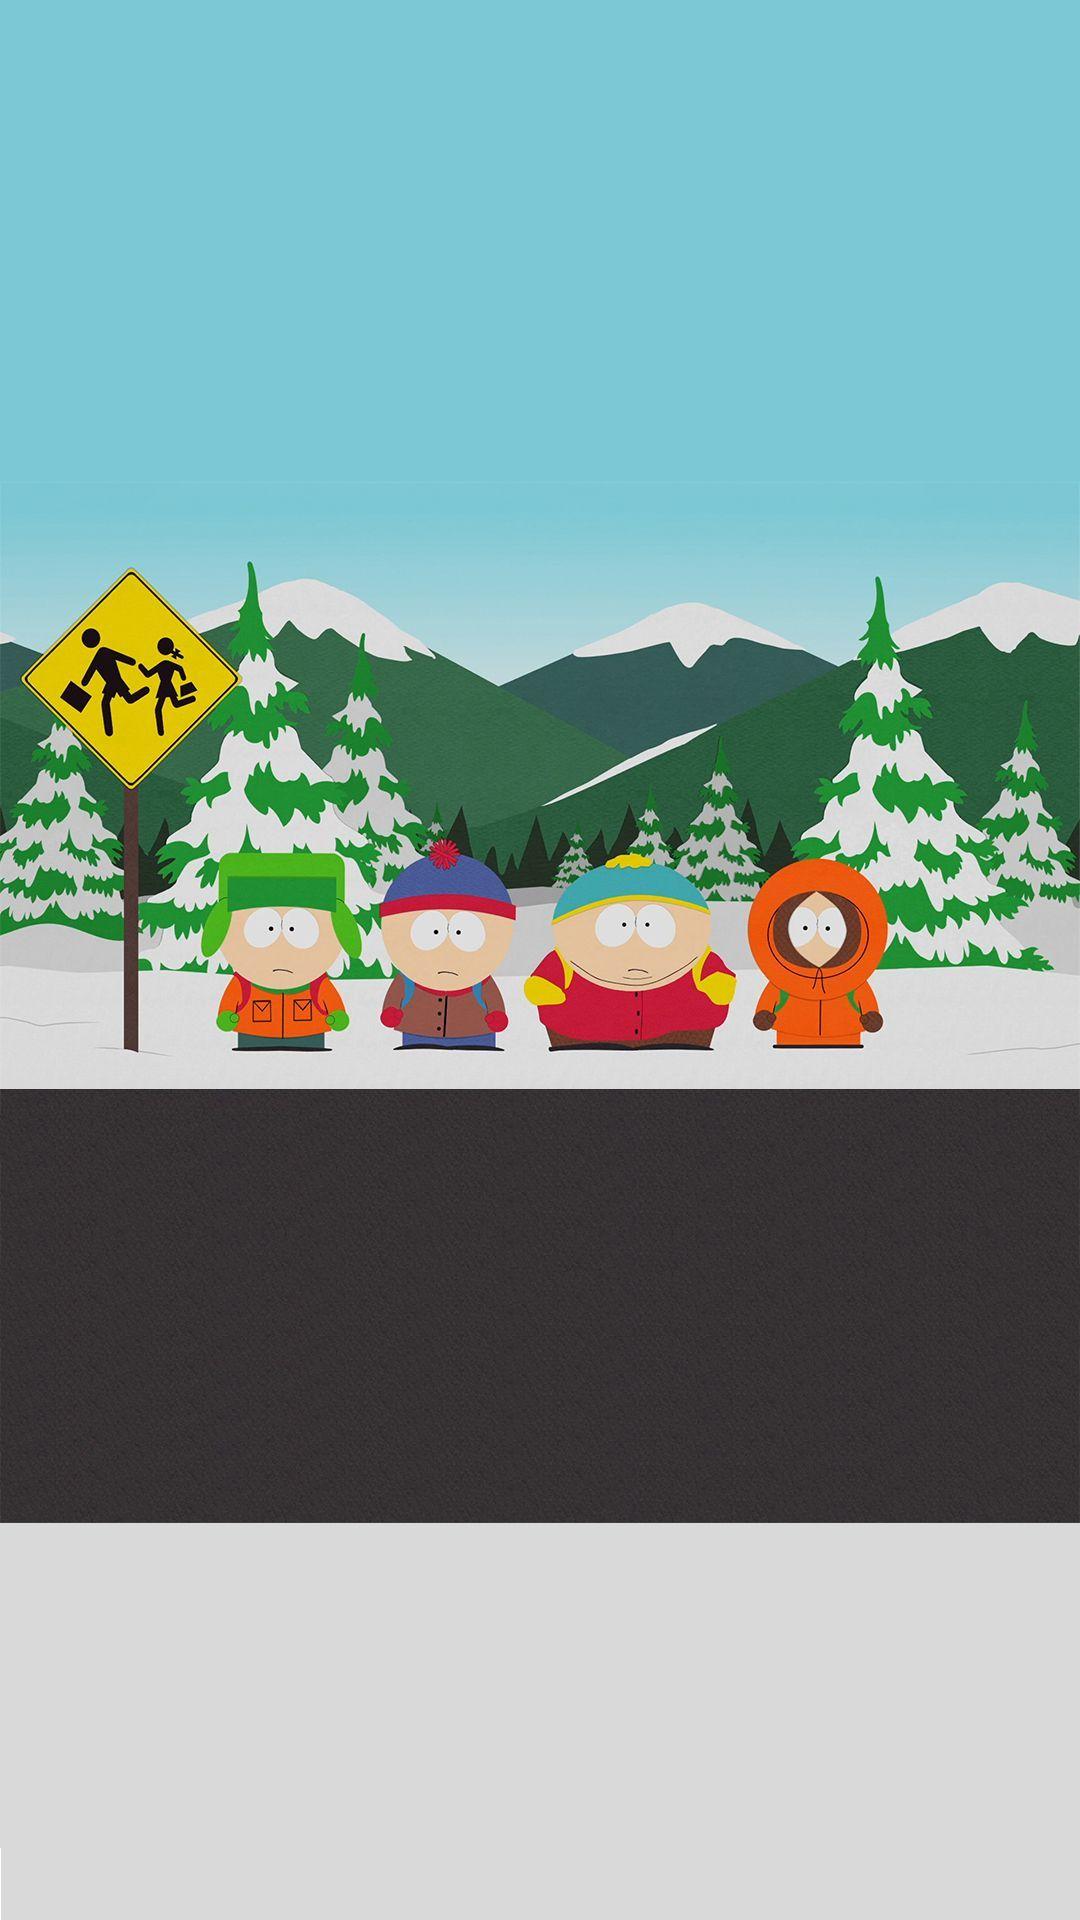 South Park 1080x1920 Resolution Wallpapers Iphone 76s6 Plus Pixel xl  One Plus 33t5